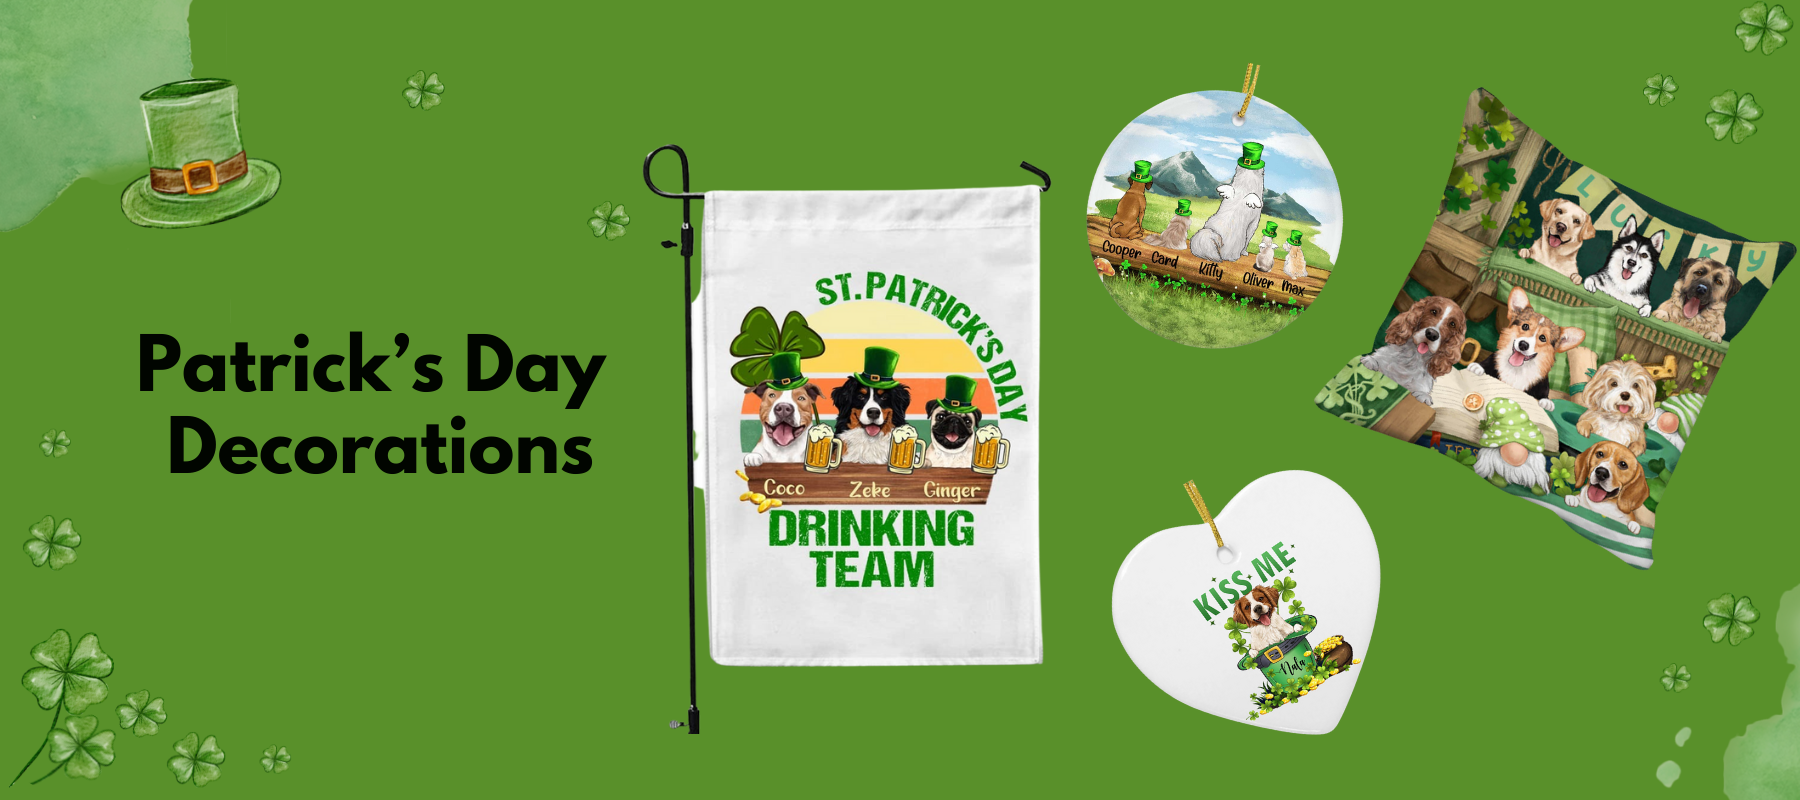 15 St. Patrick's Day Decor Pieces To Make Your Home Look wonderful